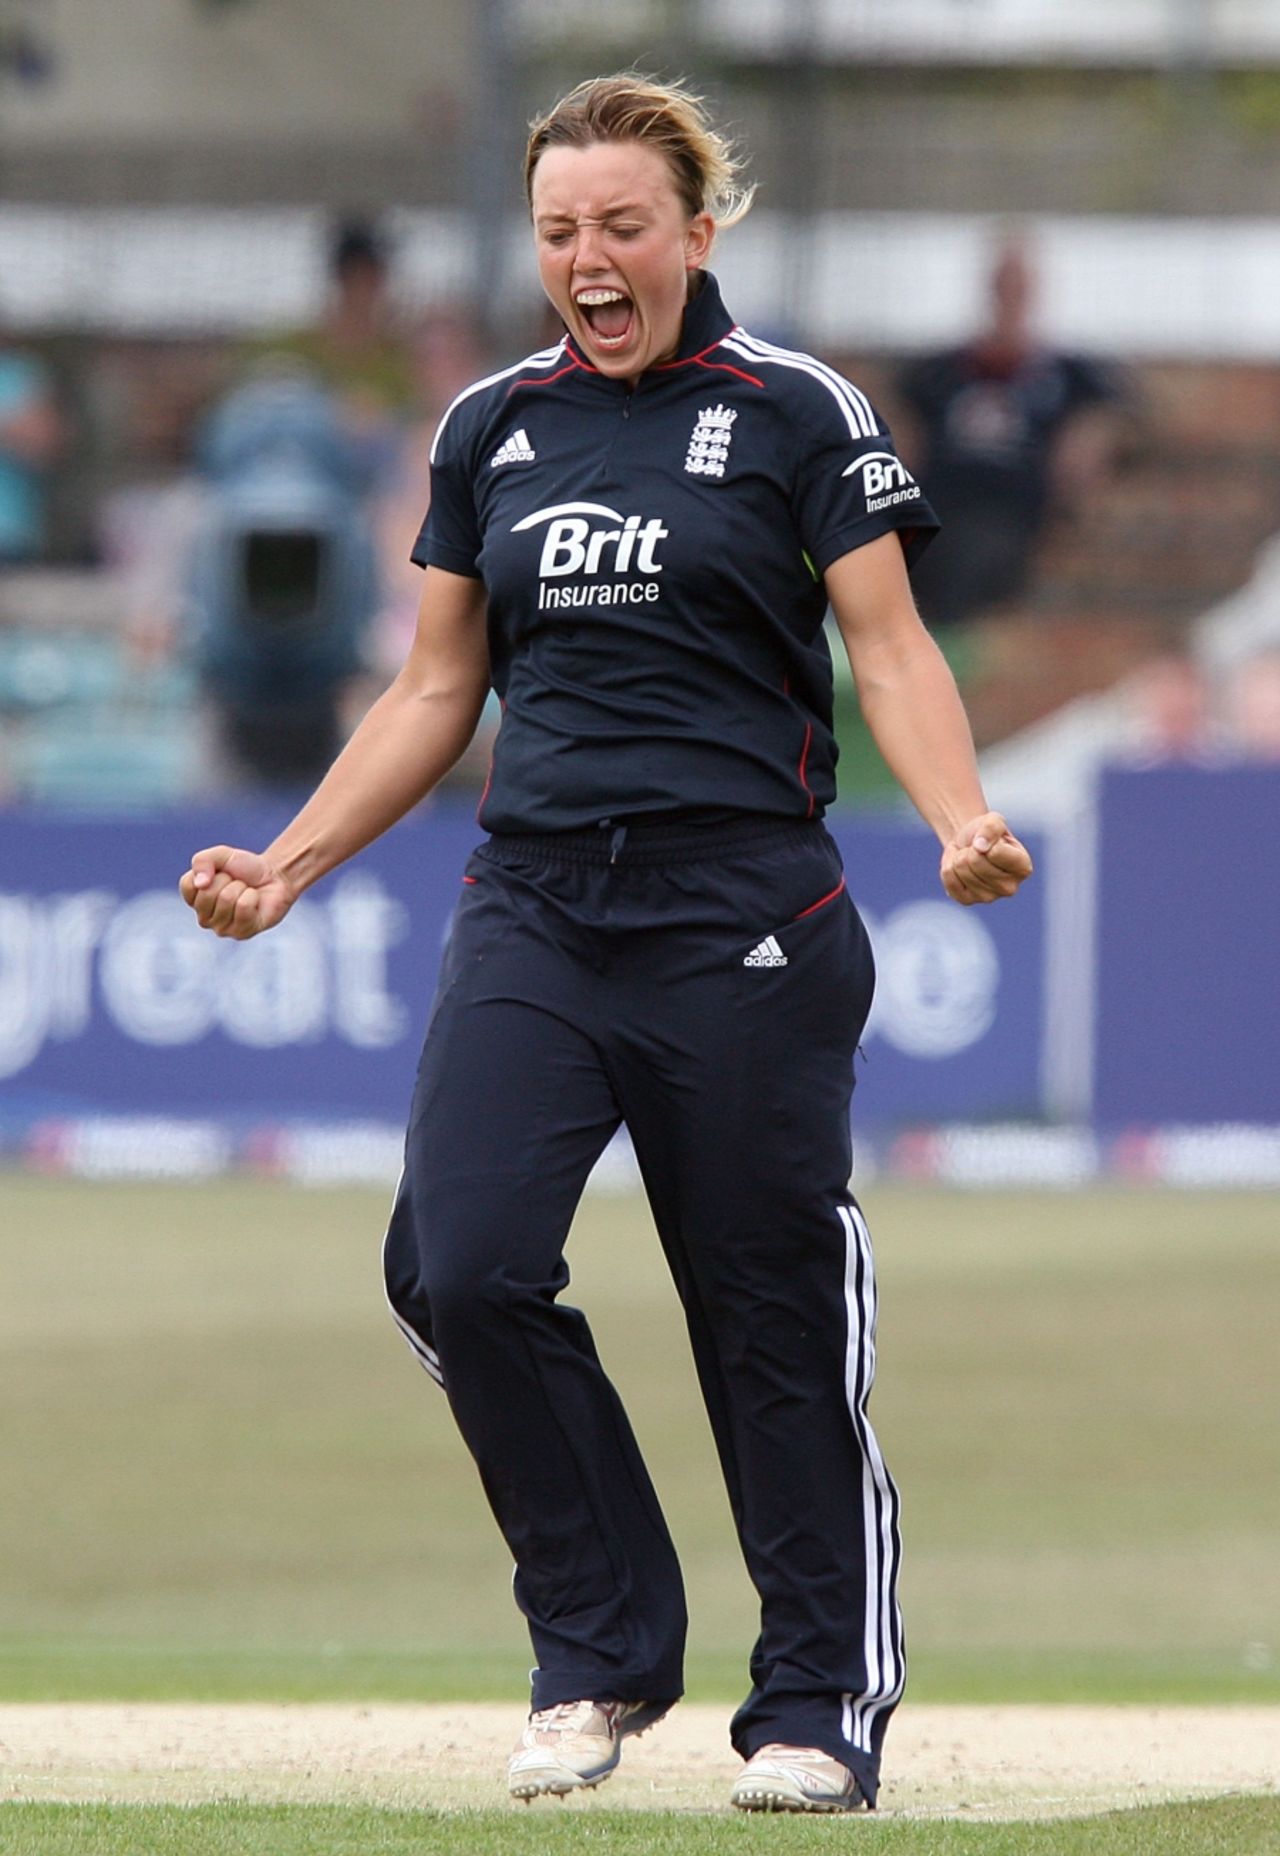 Danielle Hazell was England's leading bowler, picking up 3 for 16, England Women v New Zealand Women, 3rd Twenty20, Hove, July 2, 2010